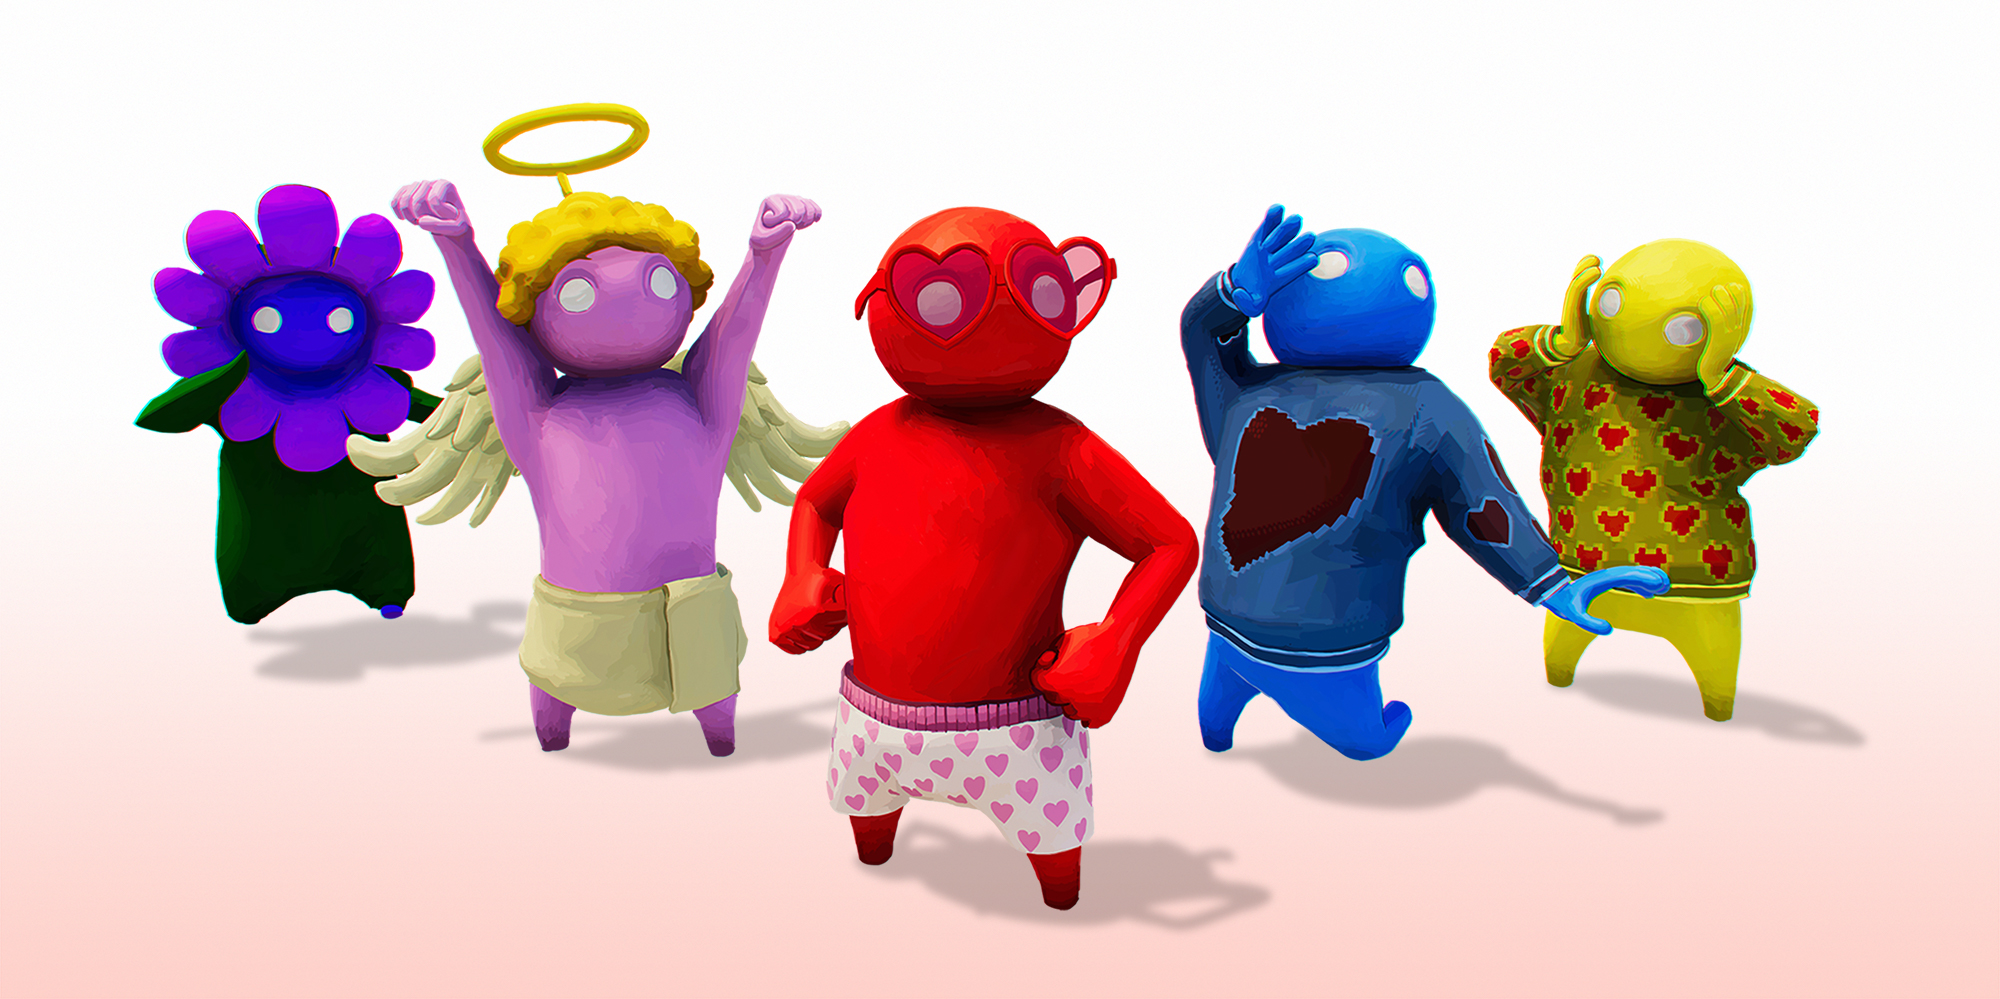 gang beasts for free on mac 2018